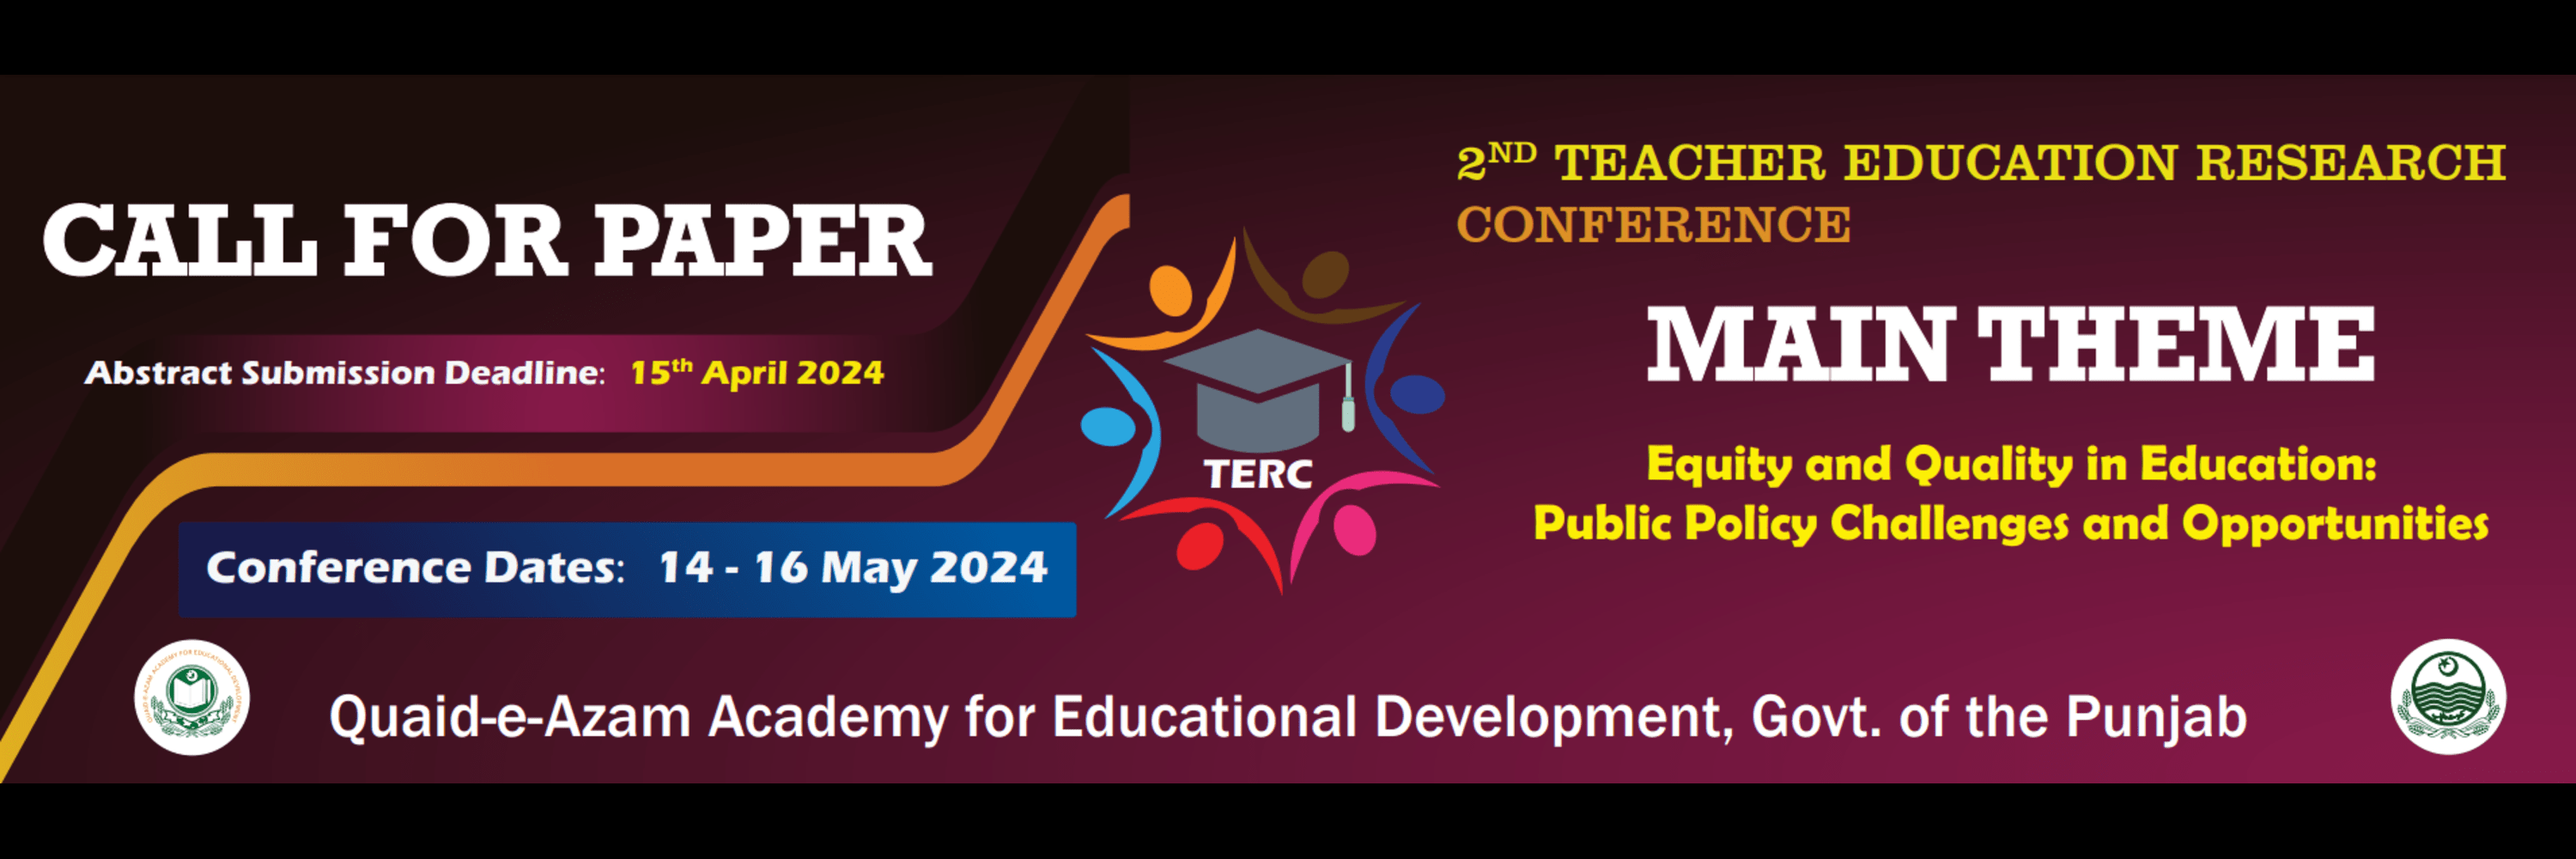 2nd Teacher Education Research Conference (TERC 2024) Call for Research Paper